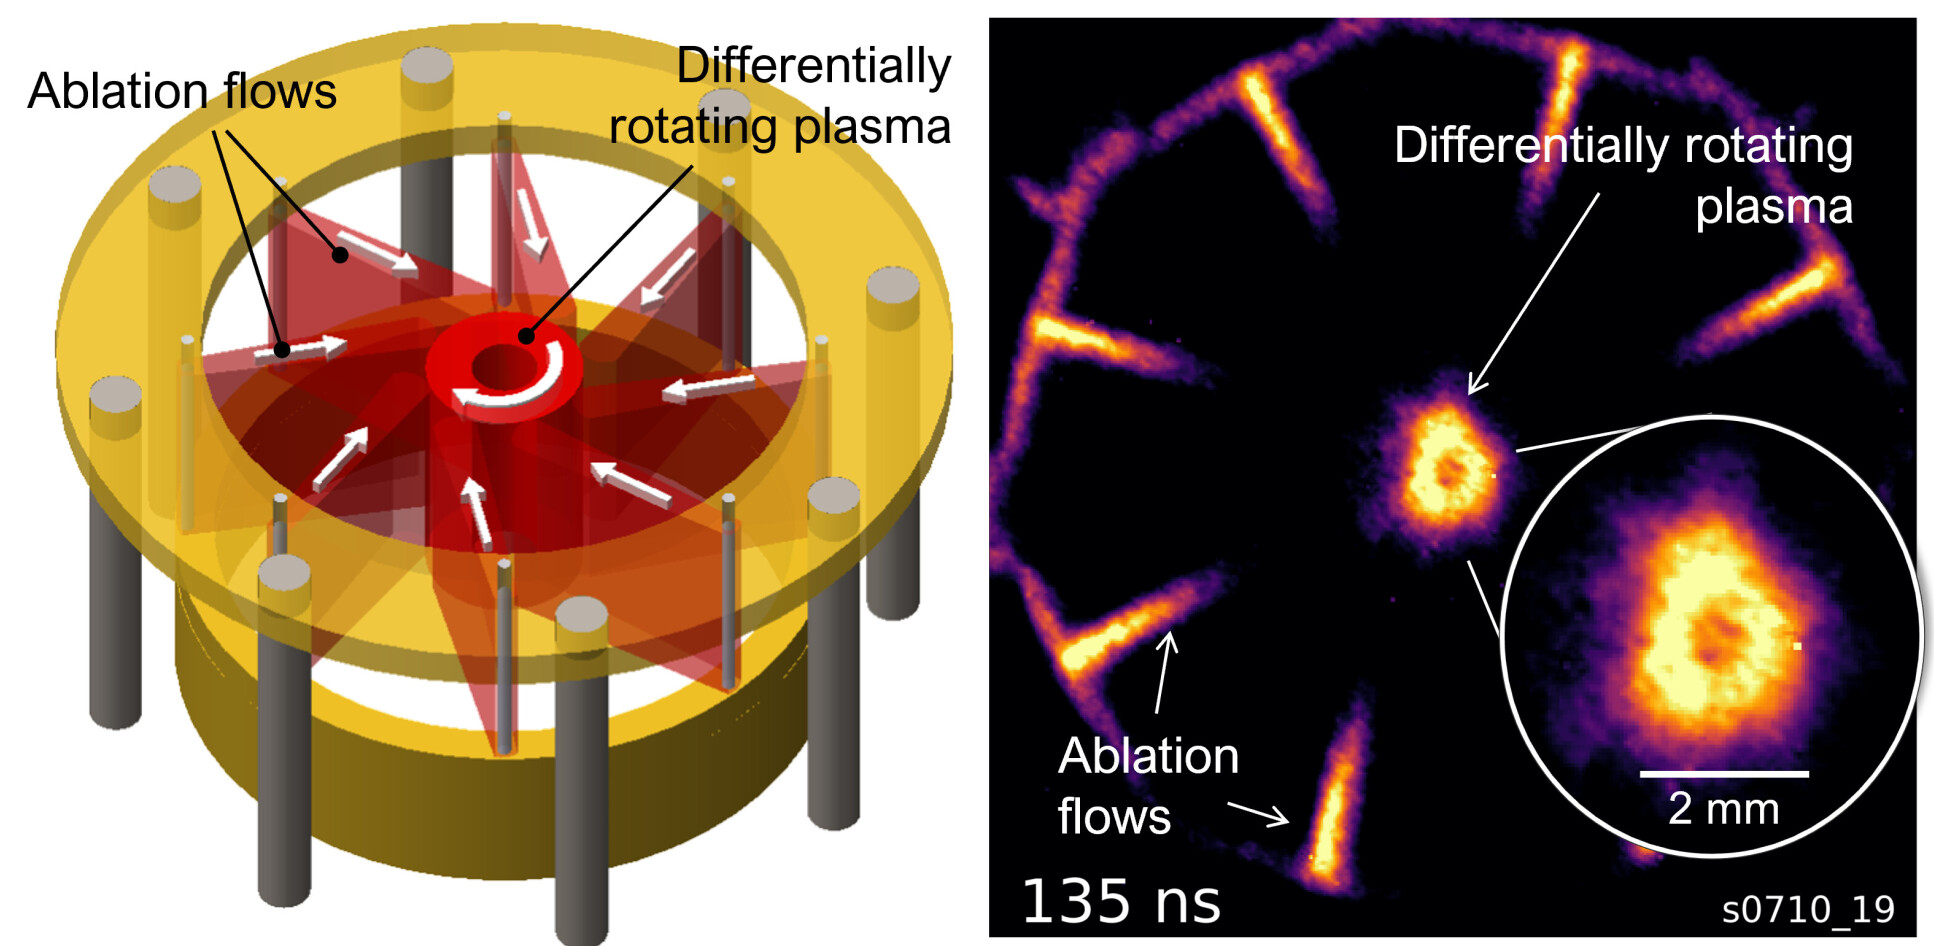 A diagram of the experimental setup, showing how rotating plasma is created, and a heat-map image of the resulting plasma interaction